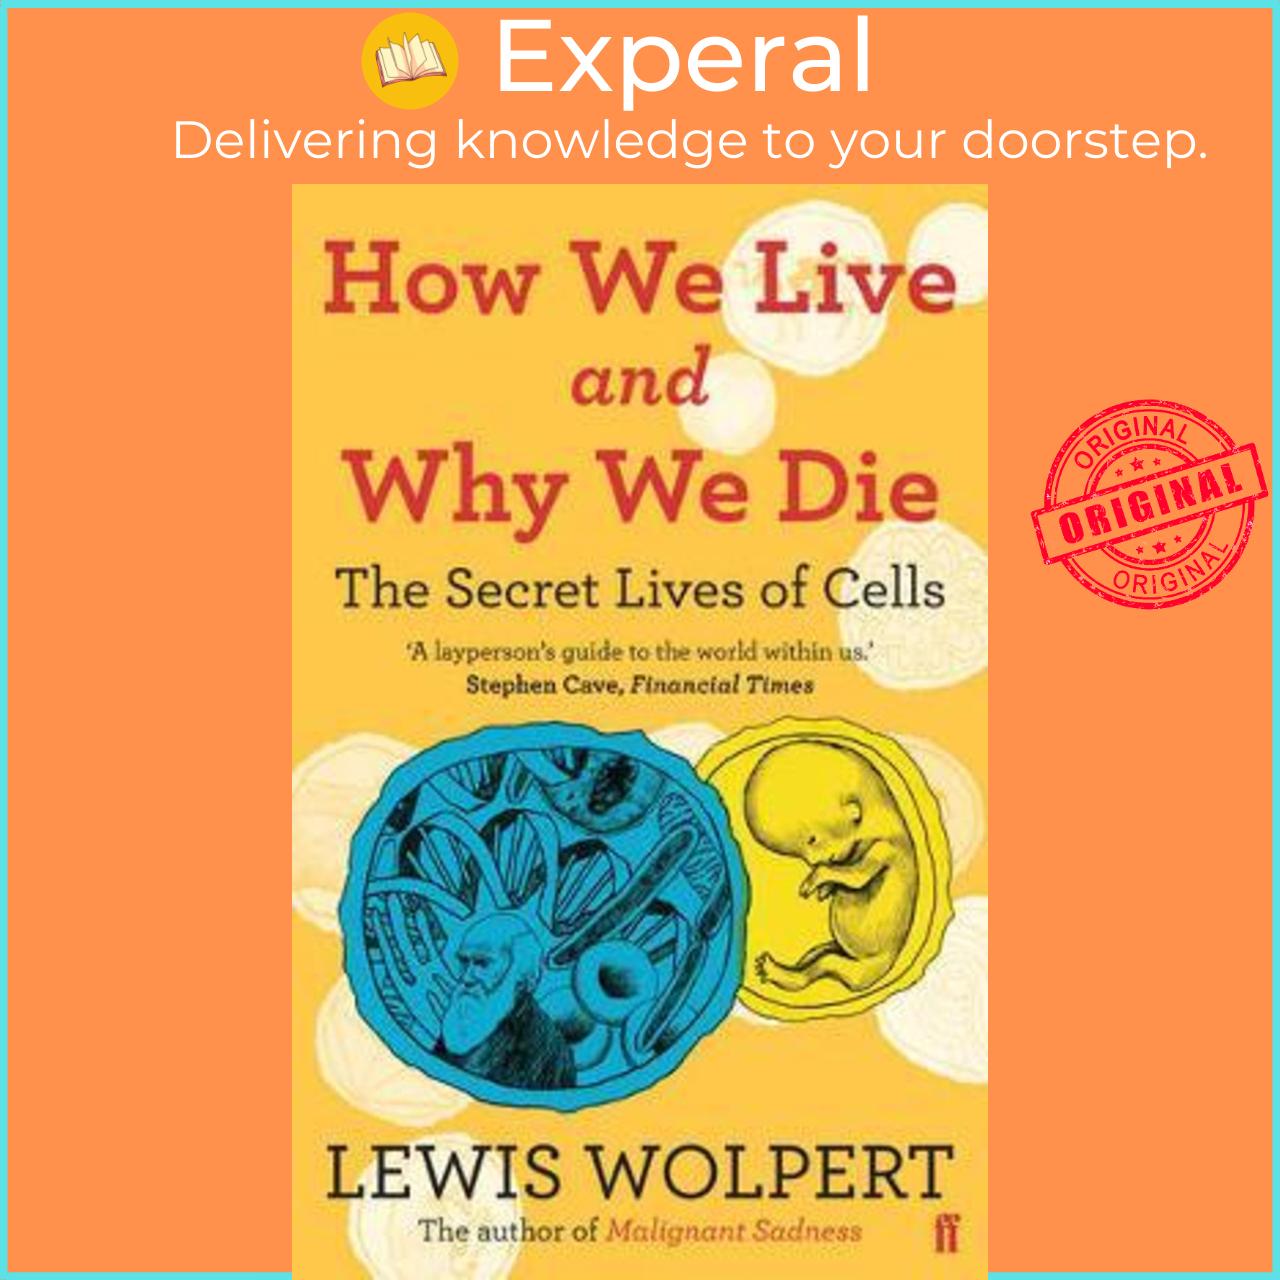 Sách - How We Live and Why We Die : the secret lives of cells by Lewis Wolpert (UK edition, paperback)